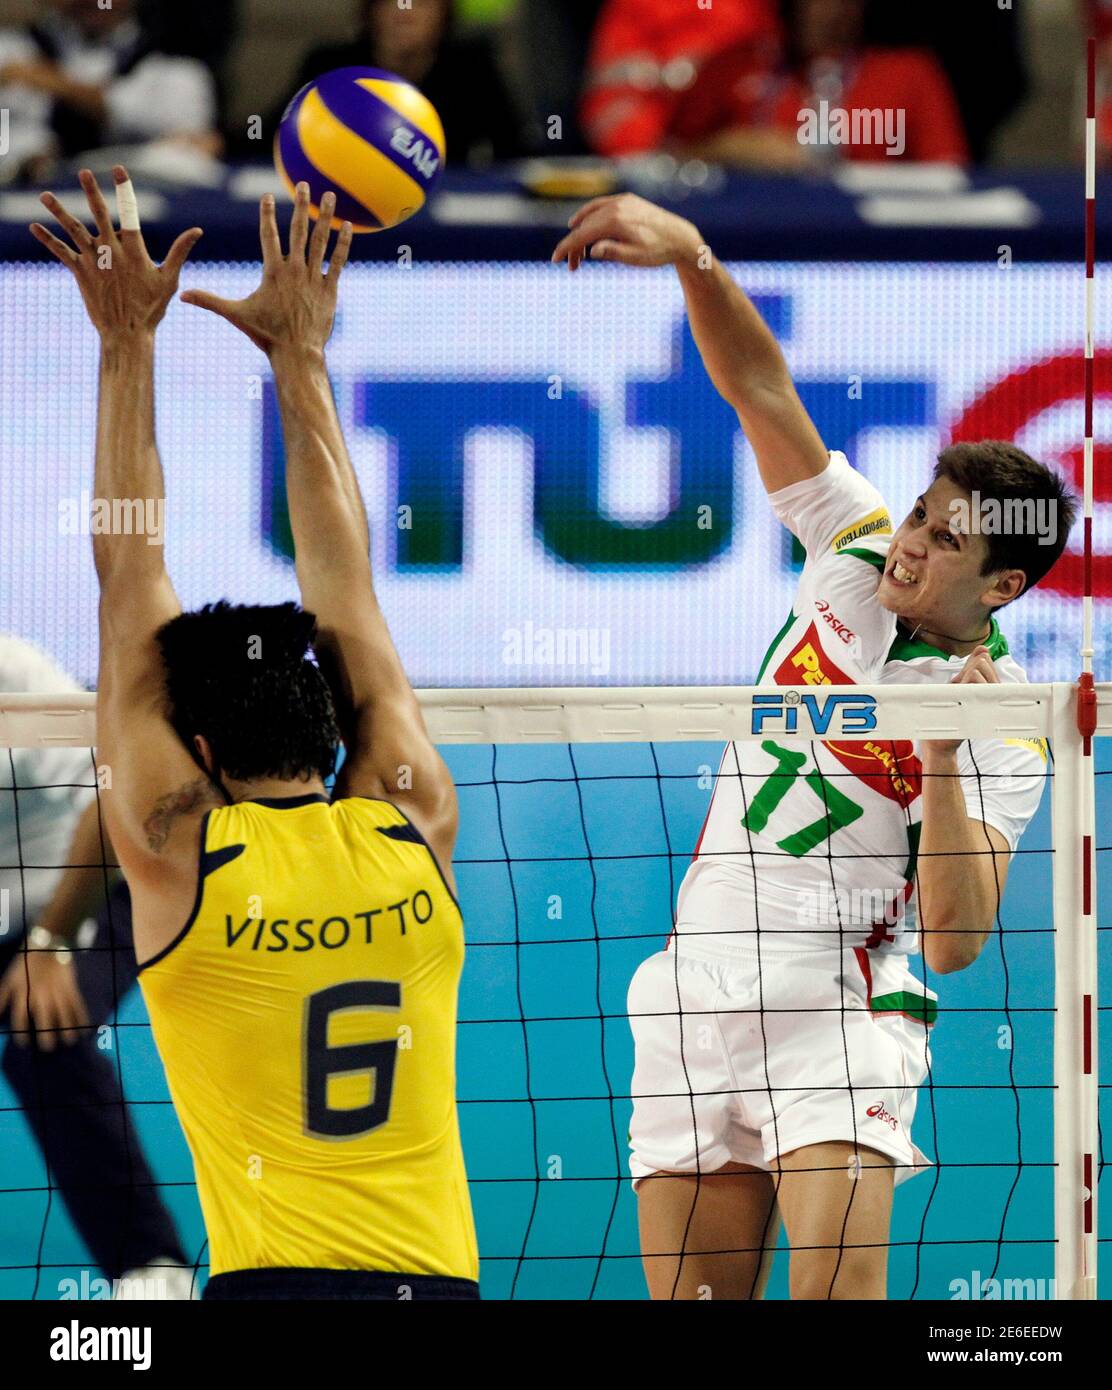 Nikolay Penchev of Bulgaria (R) spikes the ball against Leandro Vissotto  Neves of Brazil during their FIVB Men's Volleyball World Championship  second round match in Ancona October 2, 2010. REUTERS/Giampiero Sposito  (ITALY -